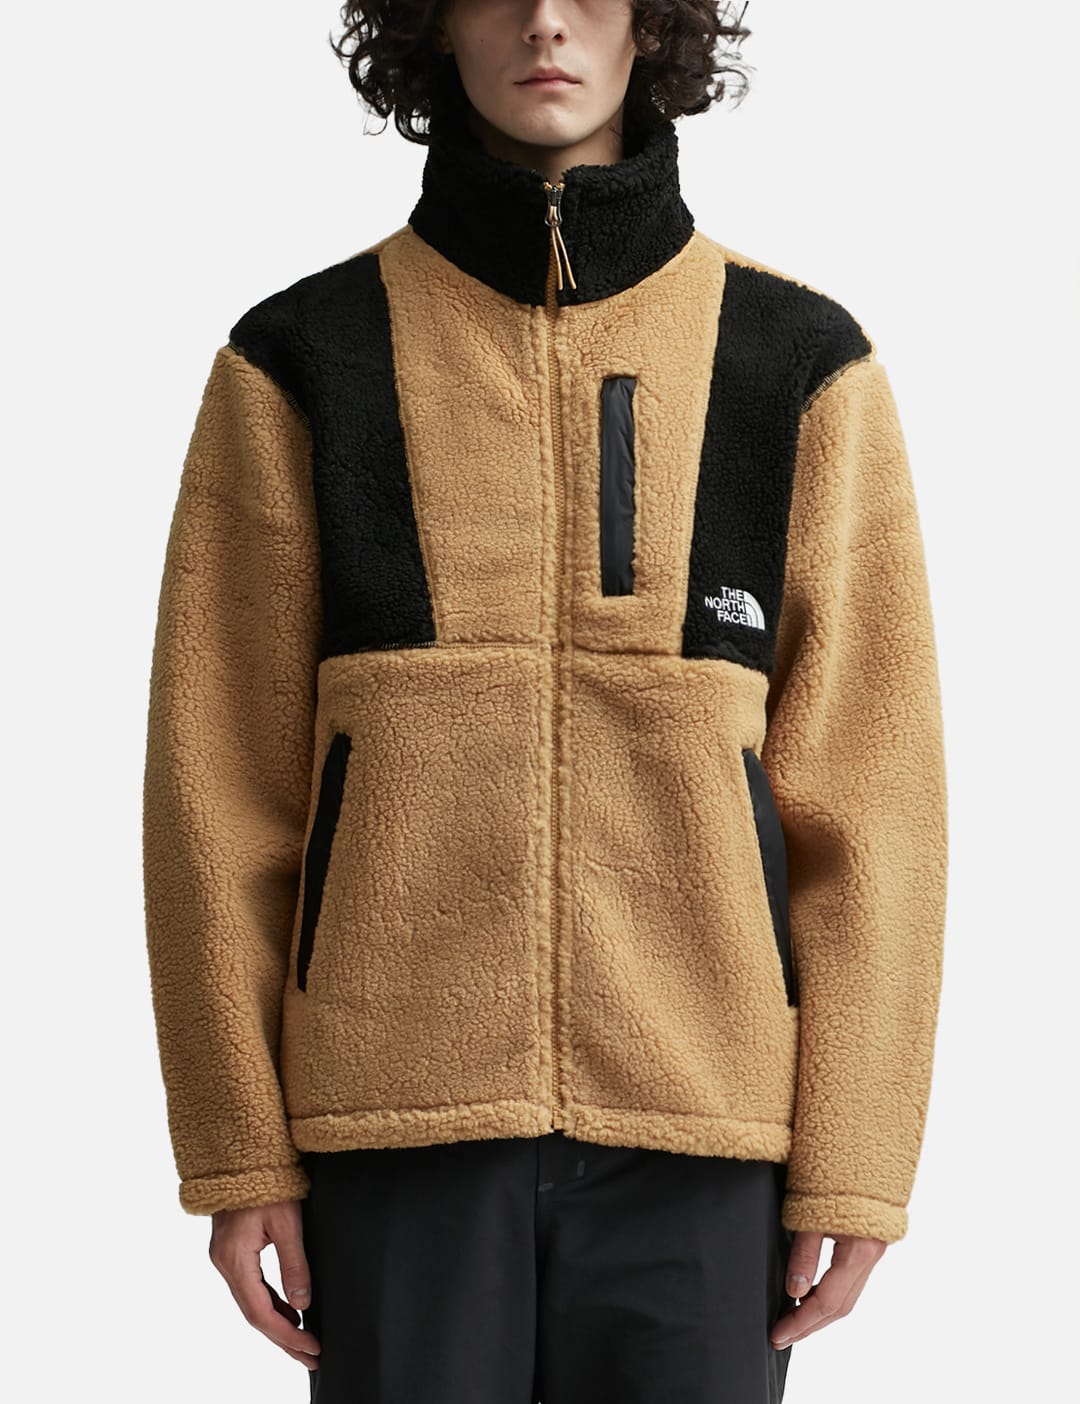 The North Face   Fleece Pile Jacket   HBX   Globally Curated